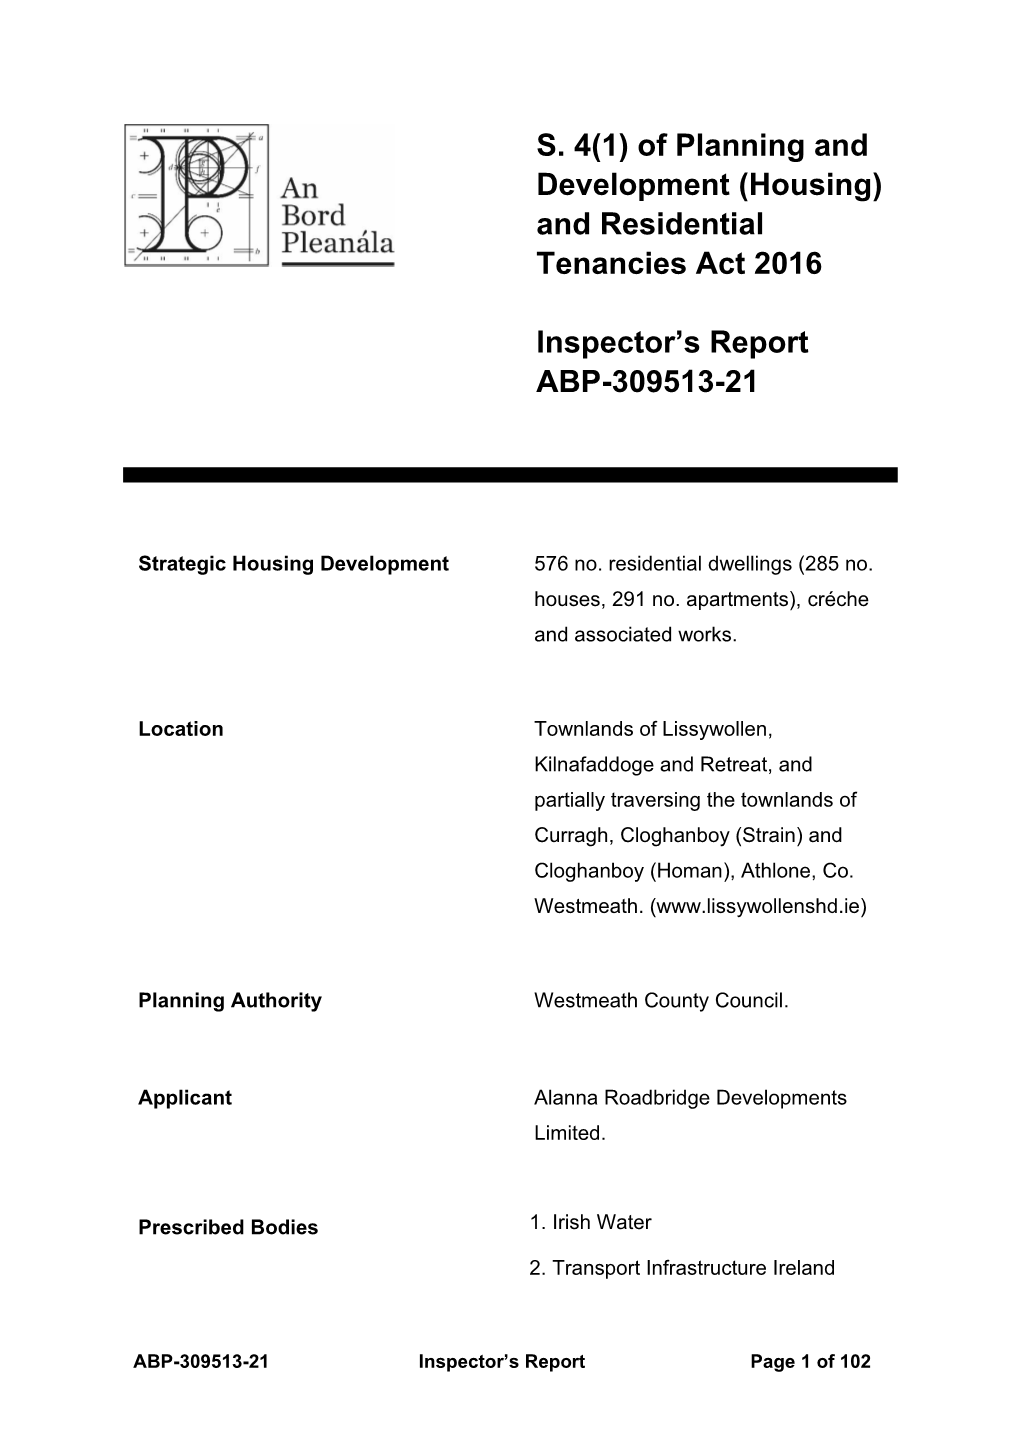 And Residential Tenancies Act 2016 Inspector's Report ABP-309513-21